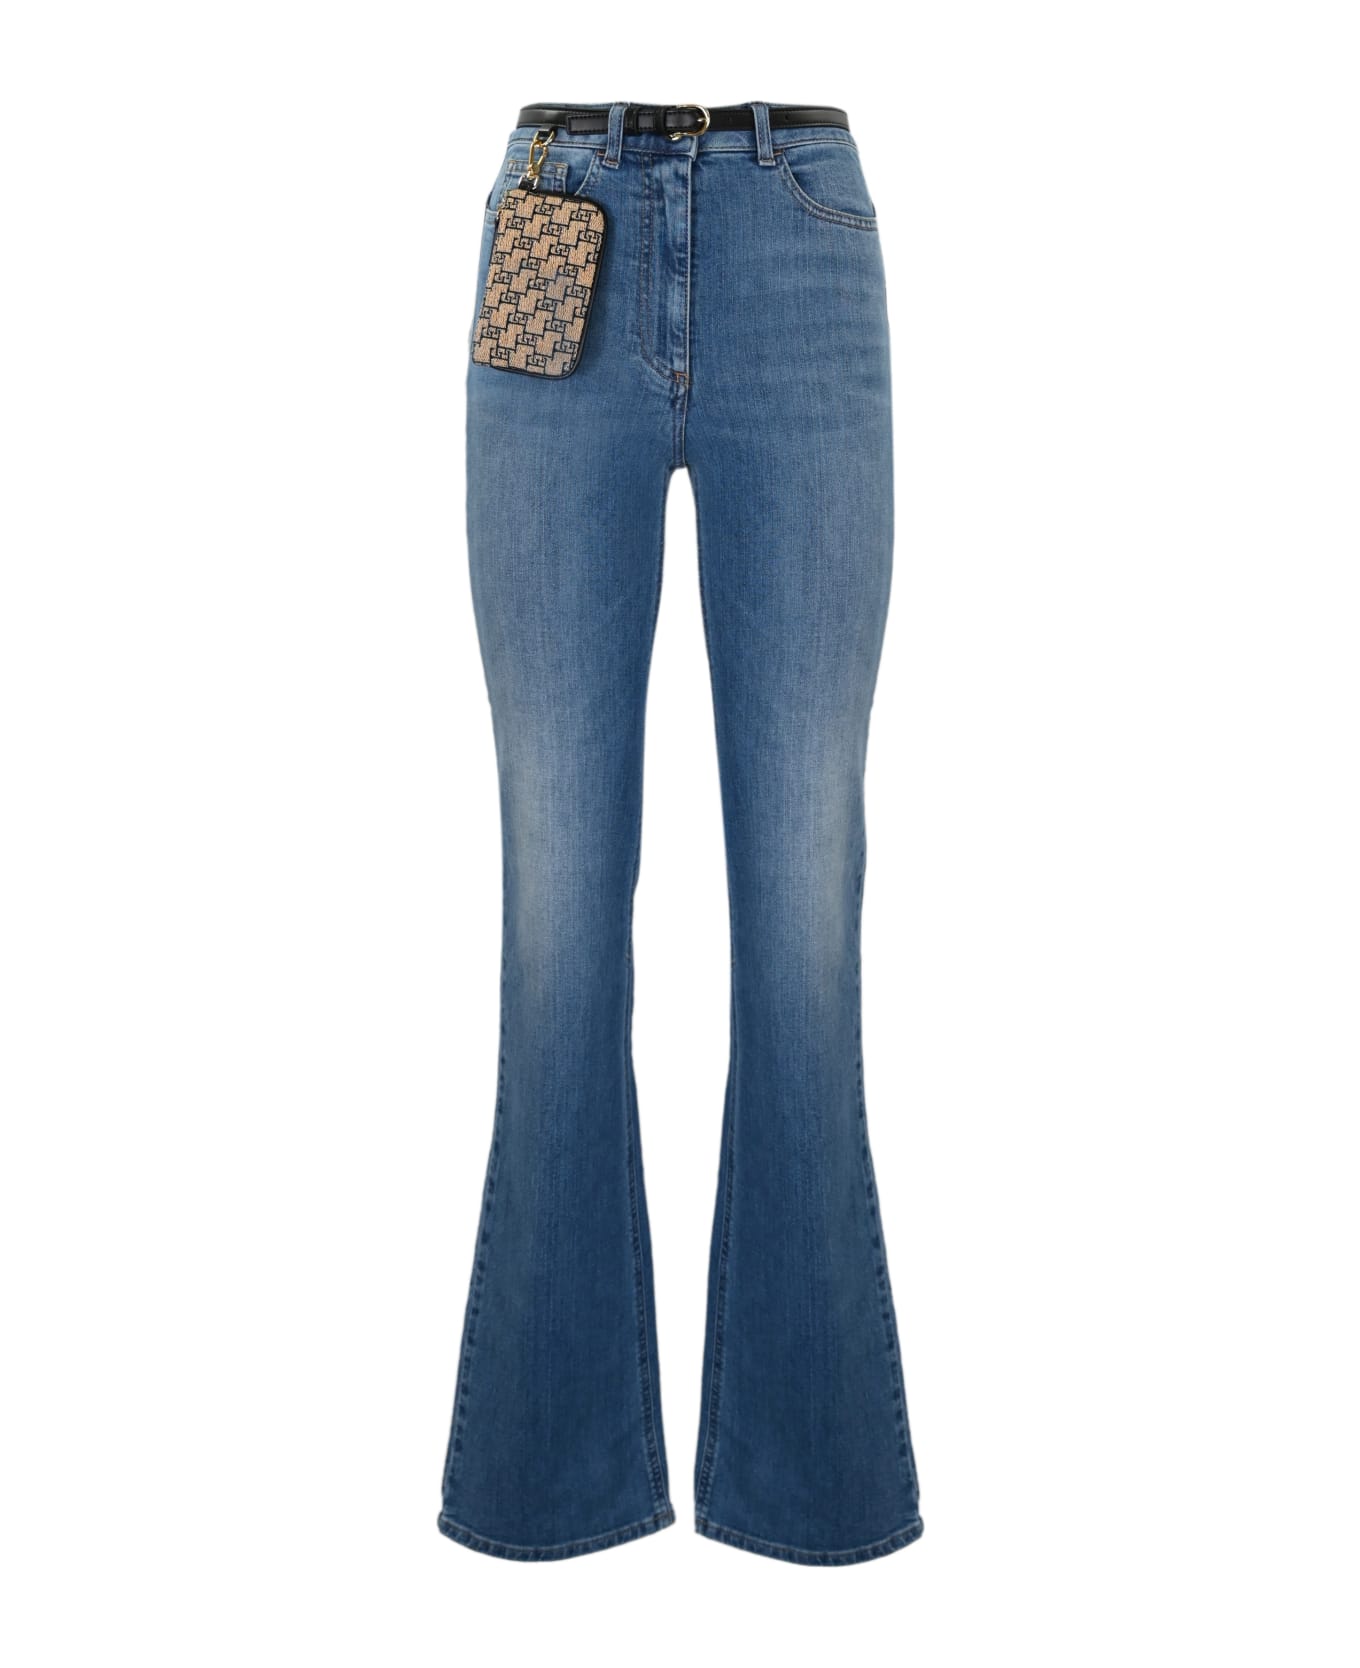 Elisabetta Franchi Flared Jeans With Belt And Clutch Bag - Light blue ボトムス